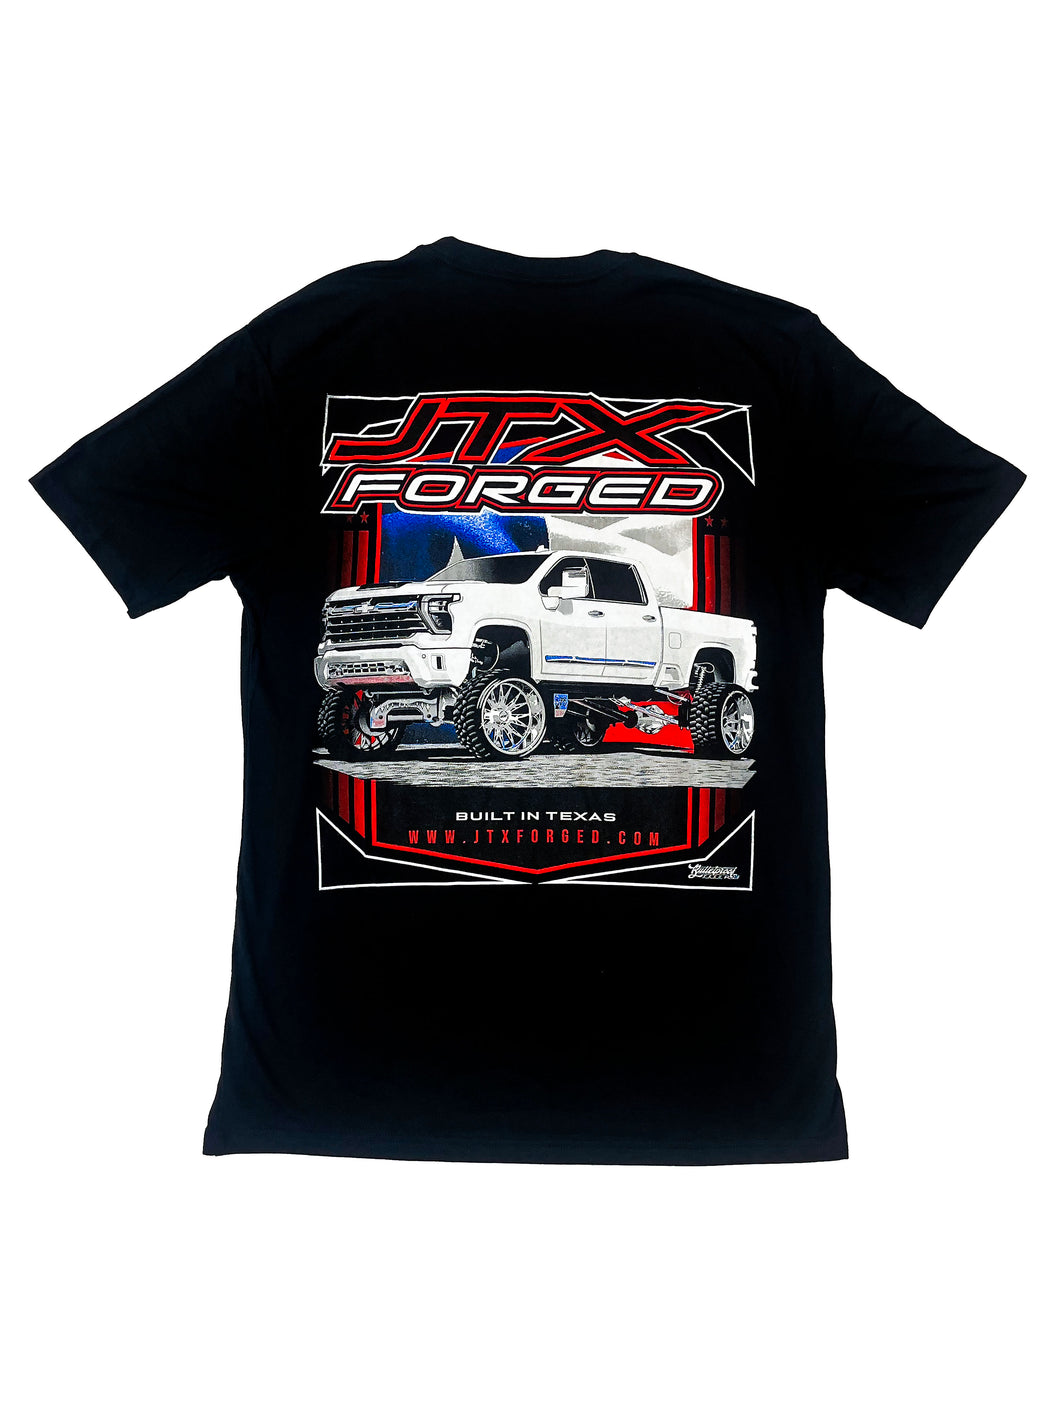 ***NEW*** JTX Forged White Truck T-shirt ***LIMITED SERIES***